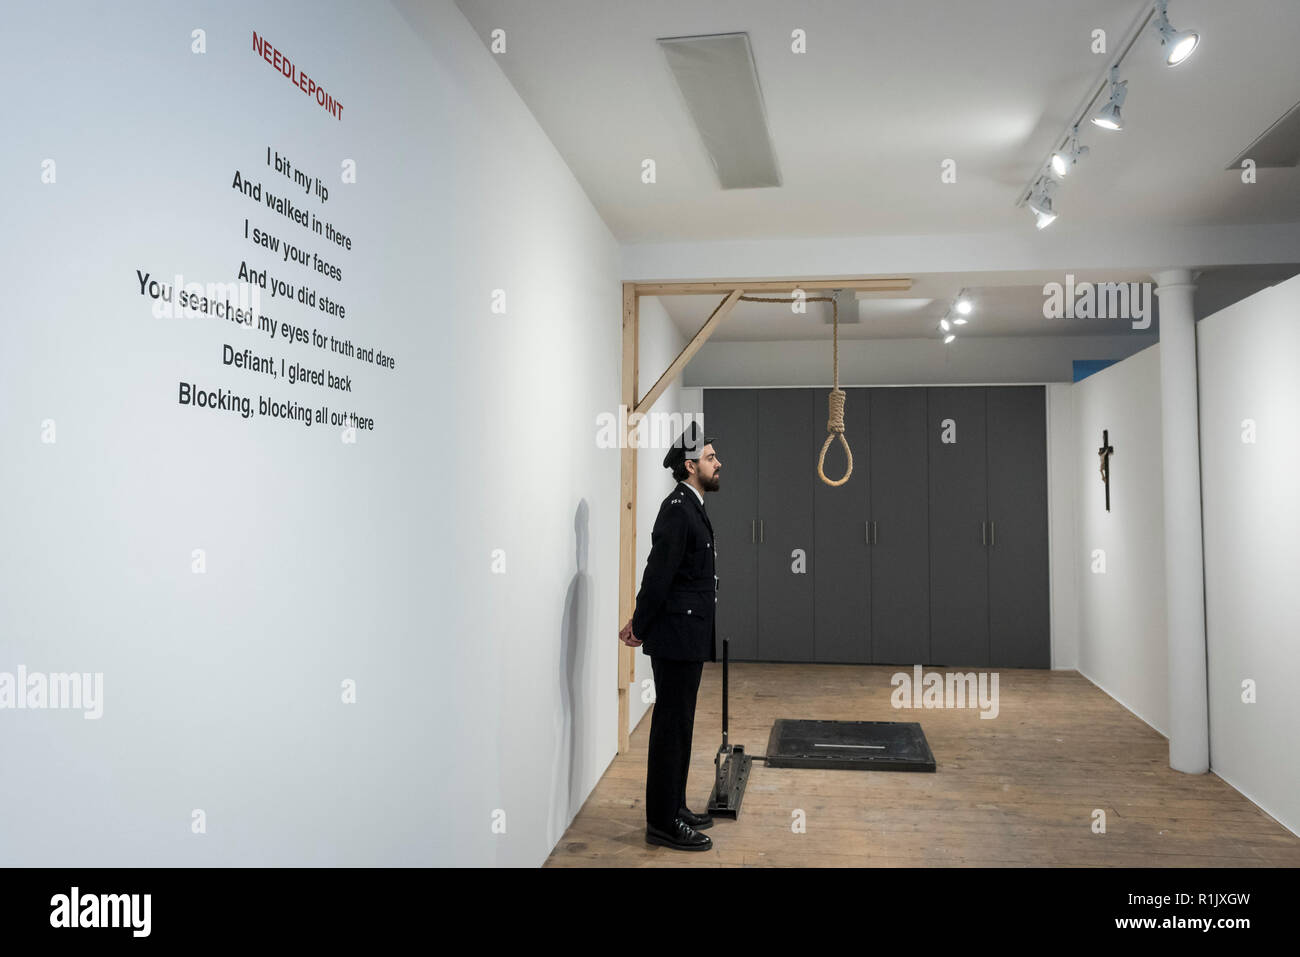 London, UK.  13 November 2018. The artist's poerty on a wall next to a staff member, posing as a prison guard, and the hangman's noose.  Preview of 'Glad I Did It', a new work by Irish artist Christina Reihill at Bermondsey Project Space.  The interactive artwork looks at the life and death of Ruth Ellis, the last woman to be hanged in Britain, after she shot her lover, racing driver, David Blakely in 1955.  On display are the artist's interpretation of Ruth Ellis' prison cell, including furniture and props, the hanging room together with a video display of the artist in conversation. Credit:  Stock Photo